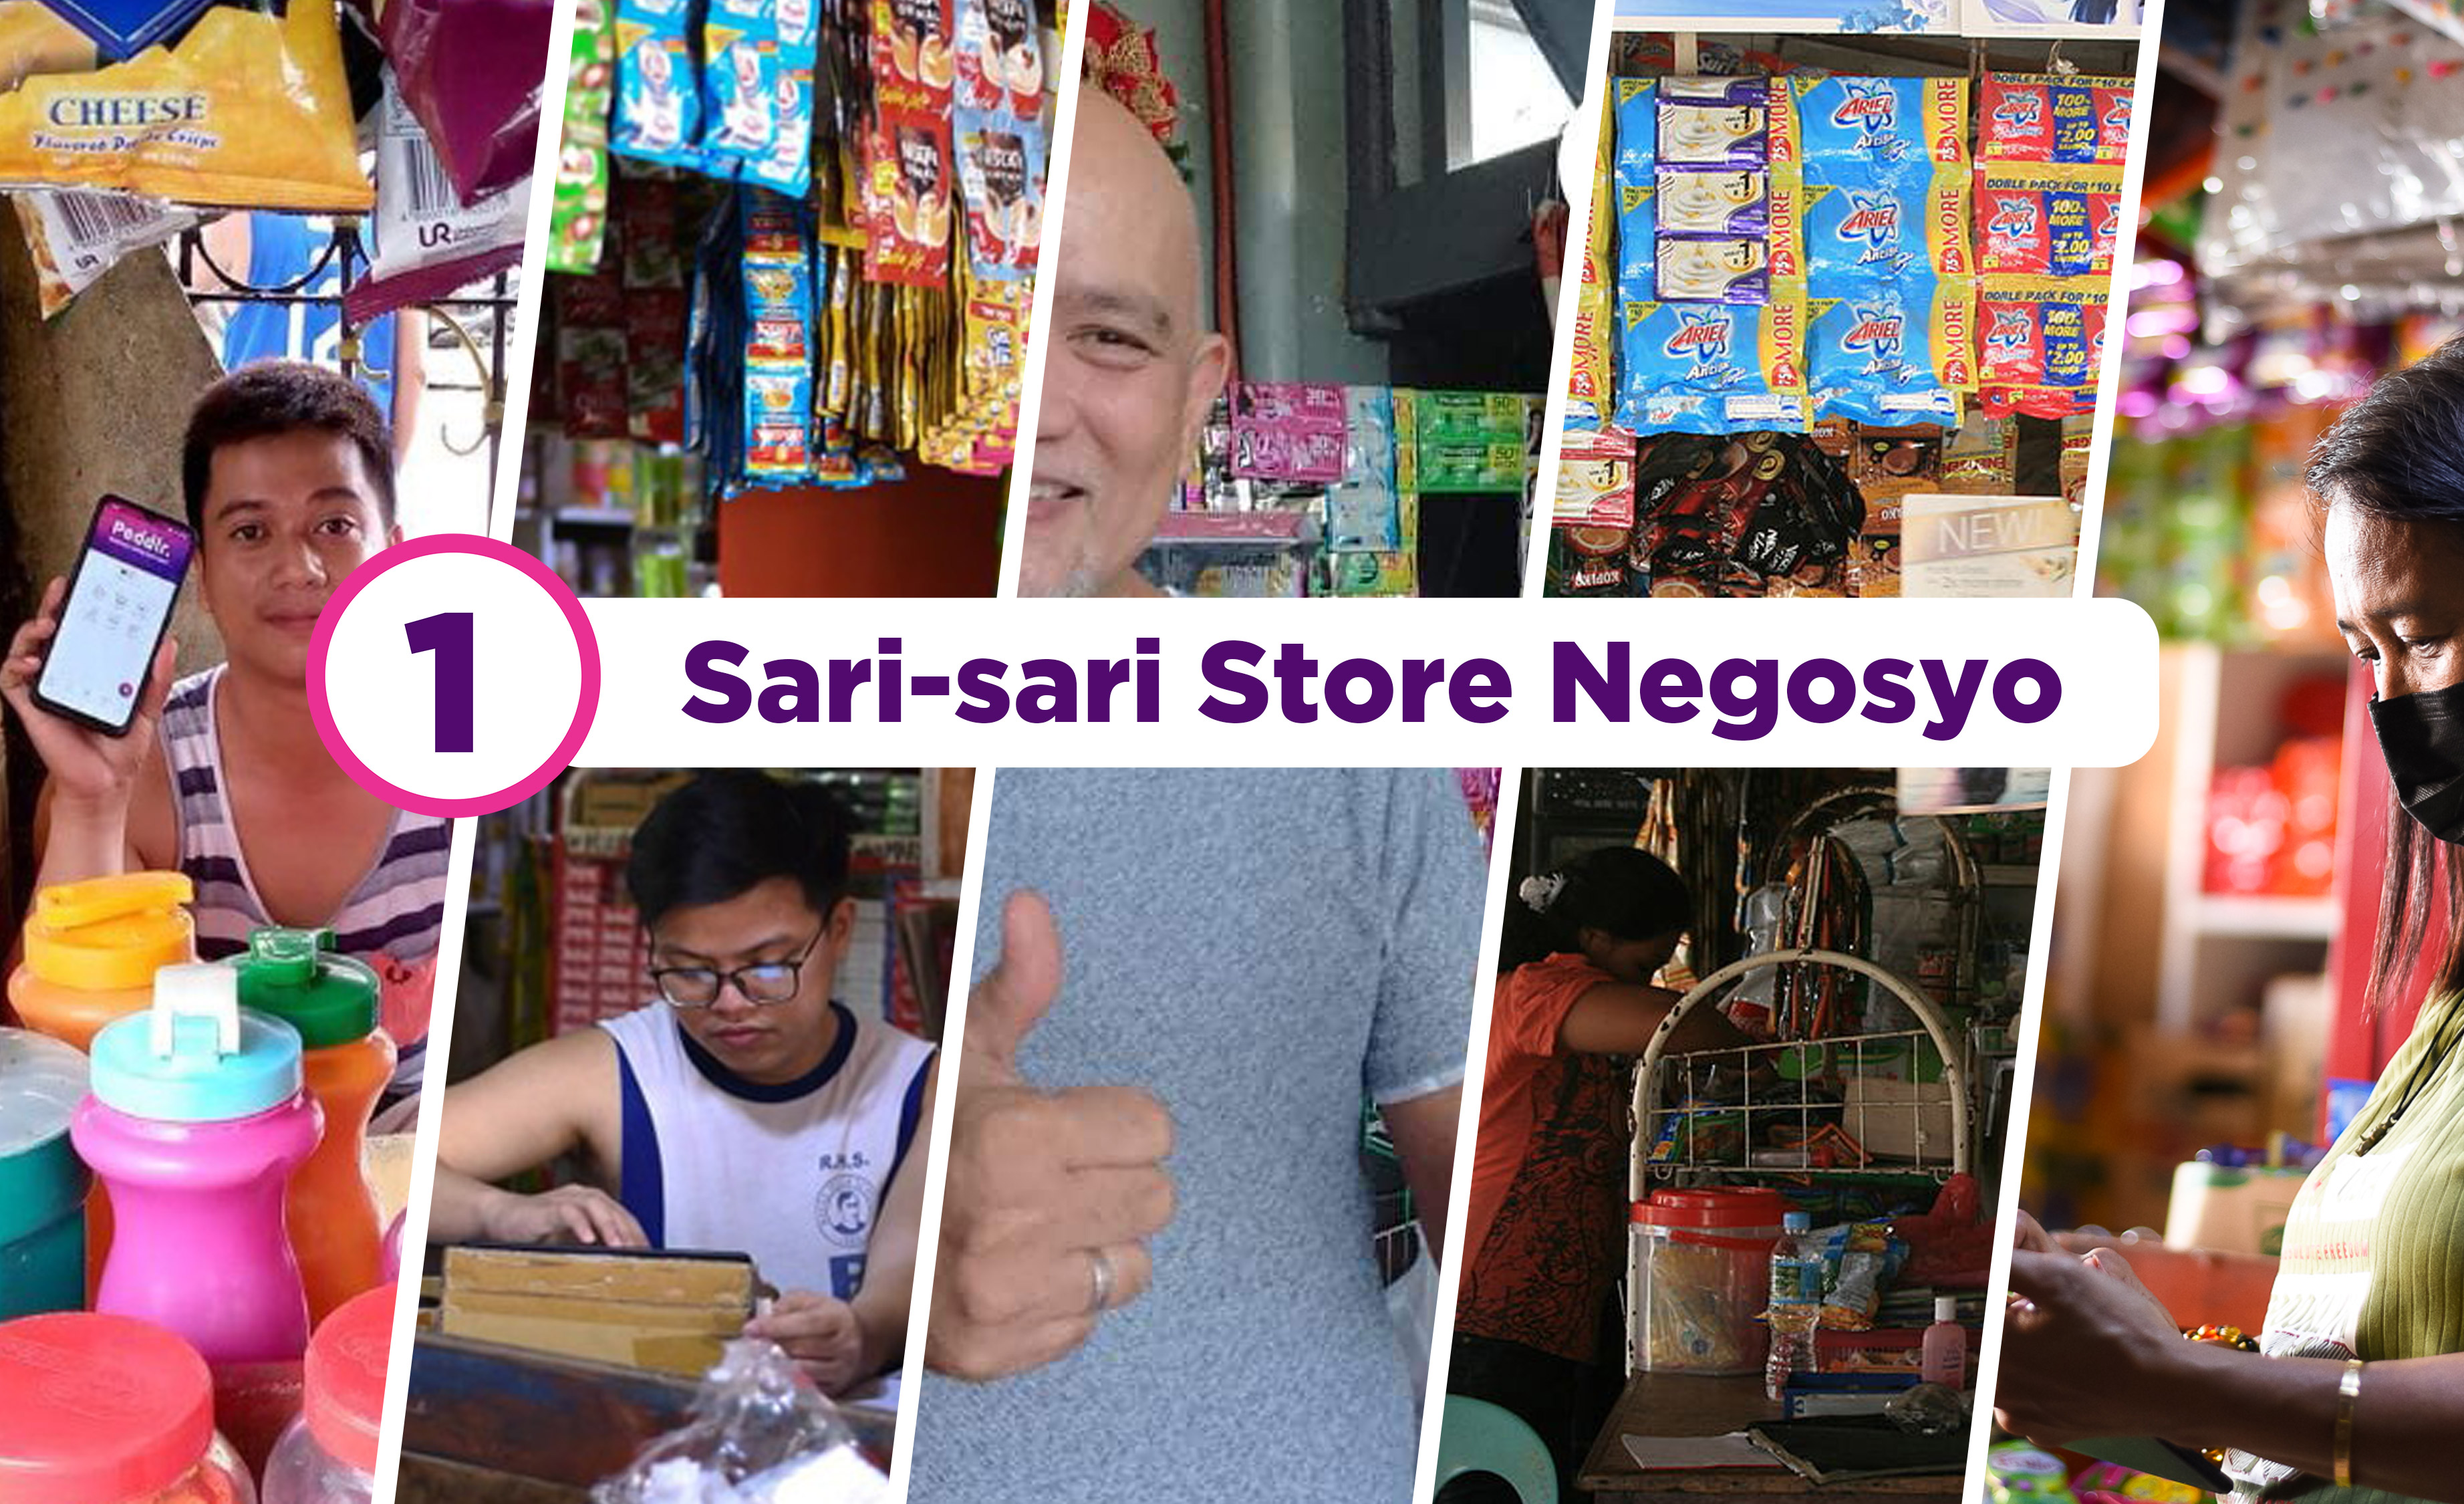 different owners of a sari-sati store negosyo